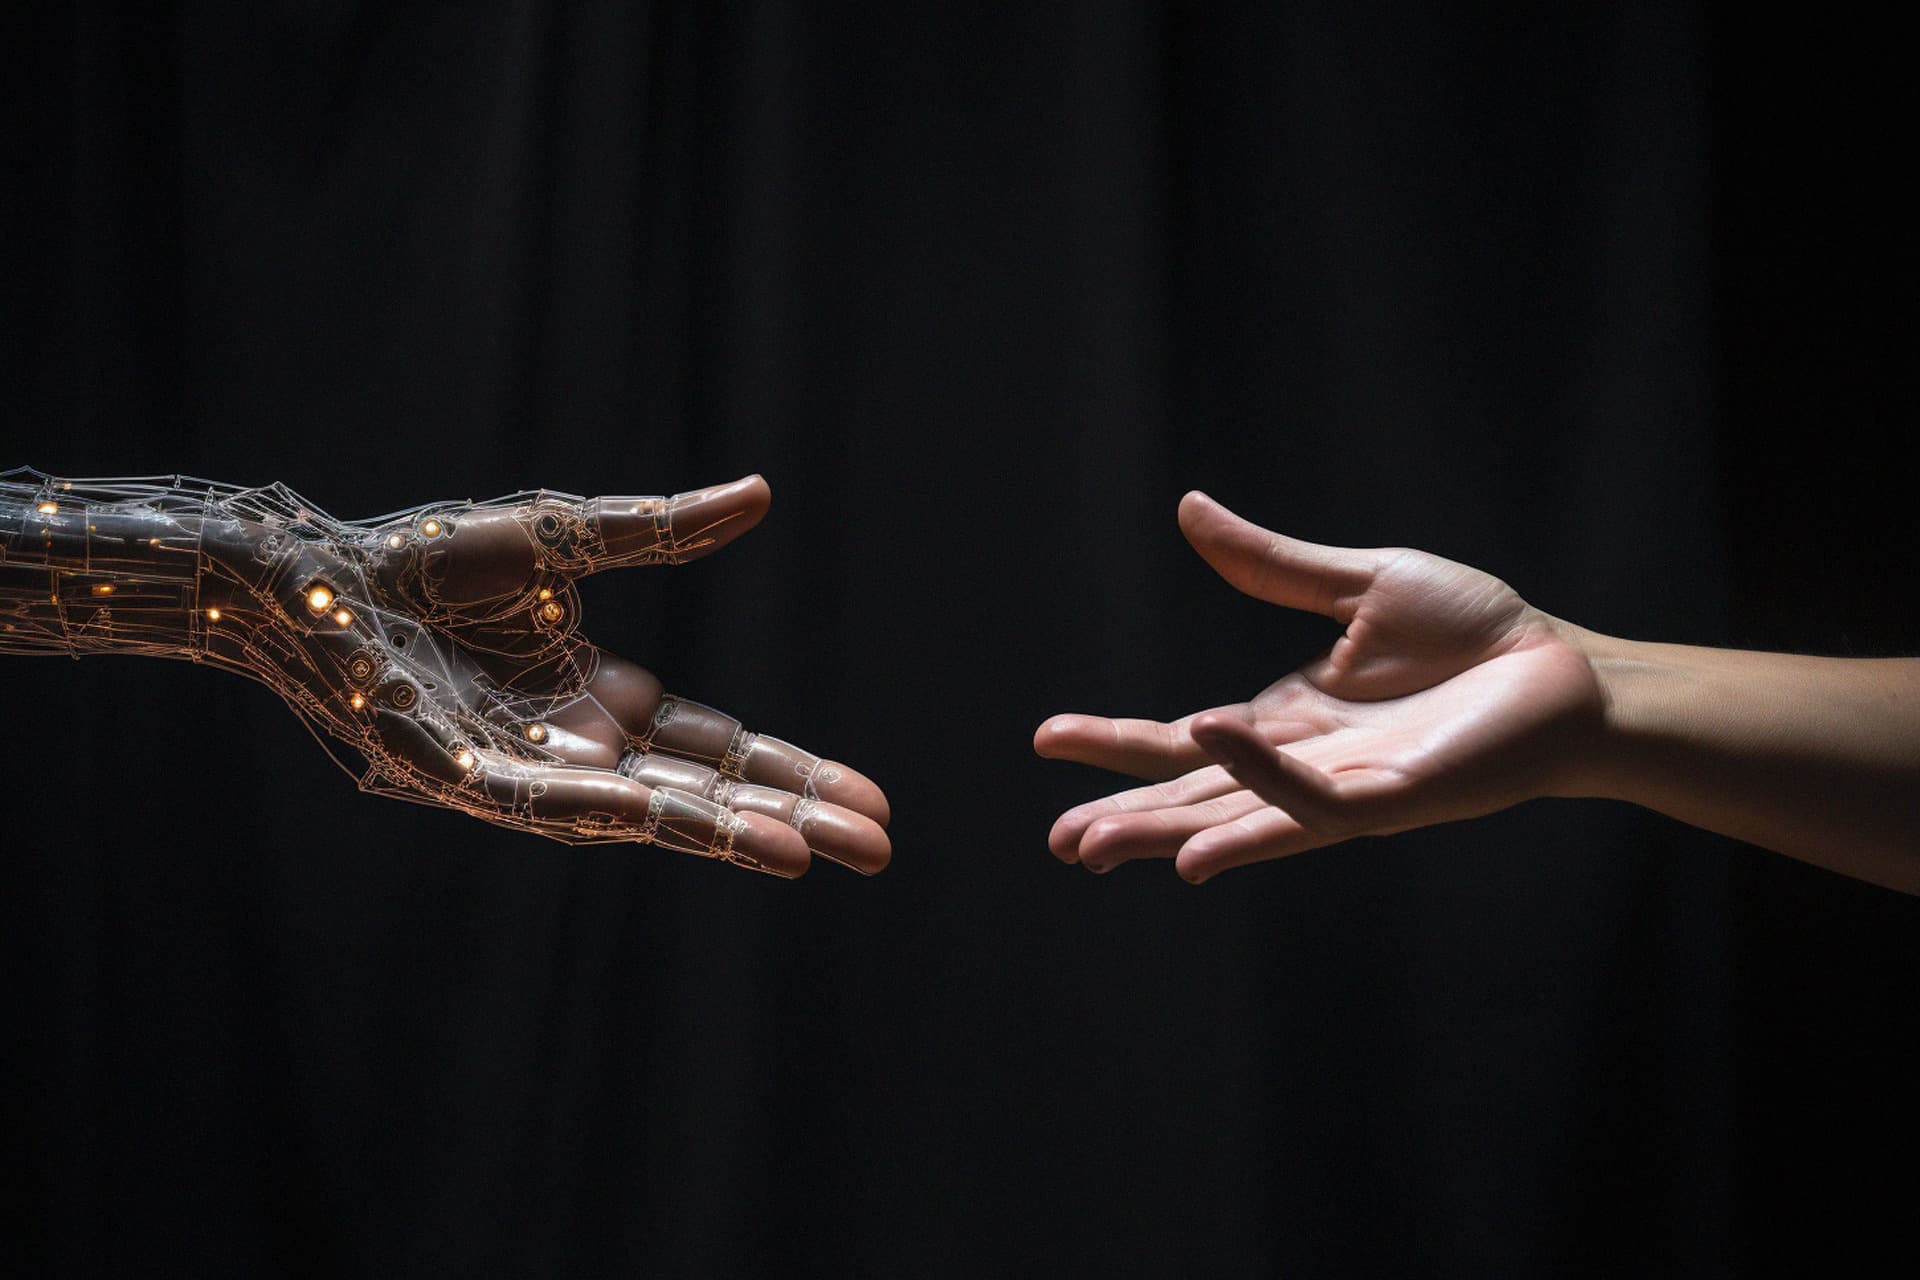 Two hands reaching to each other, one robotic style with four fingers and the other is a human hand with six fingers